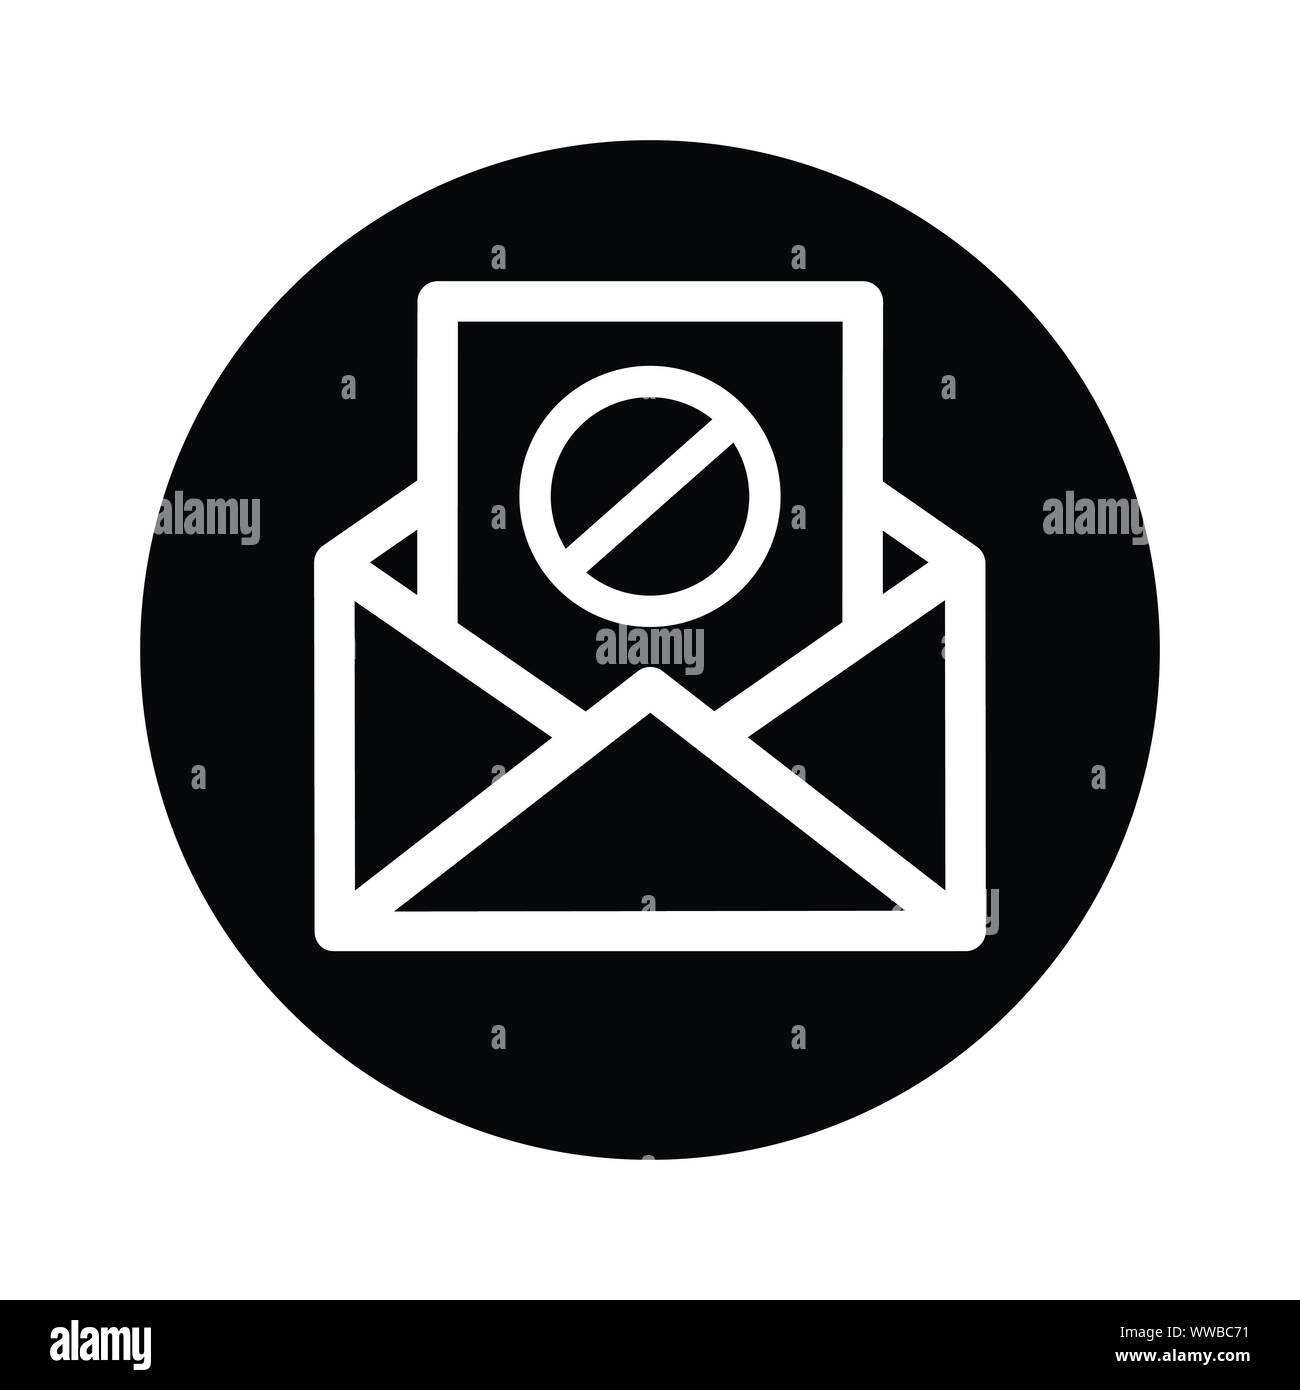 Beautiful design and fully editable Email Spamming Icon, Spam mailing, wrong e-mail address for commercial, print media, web or any type of design pro Stock Vector